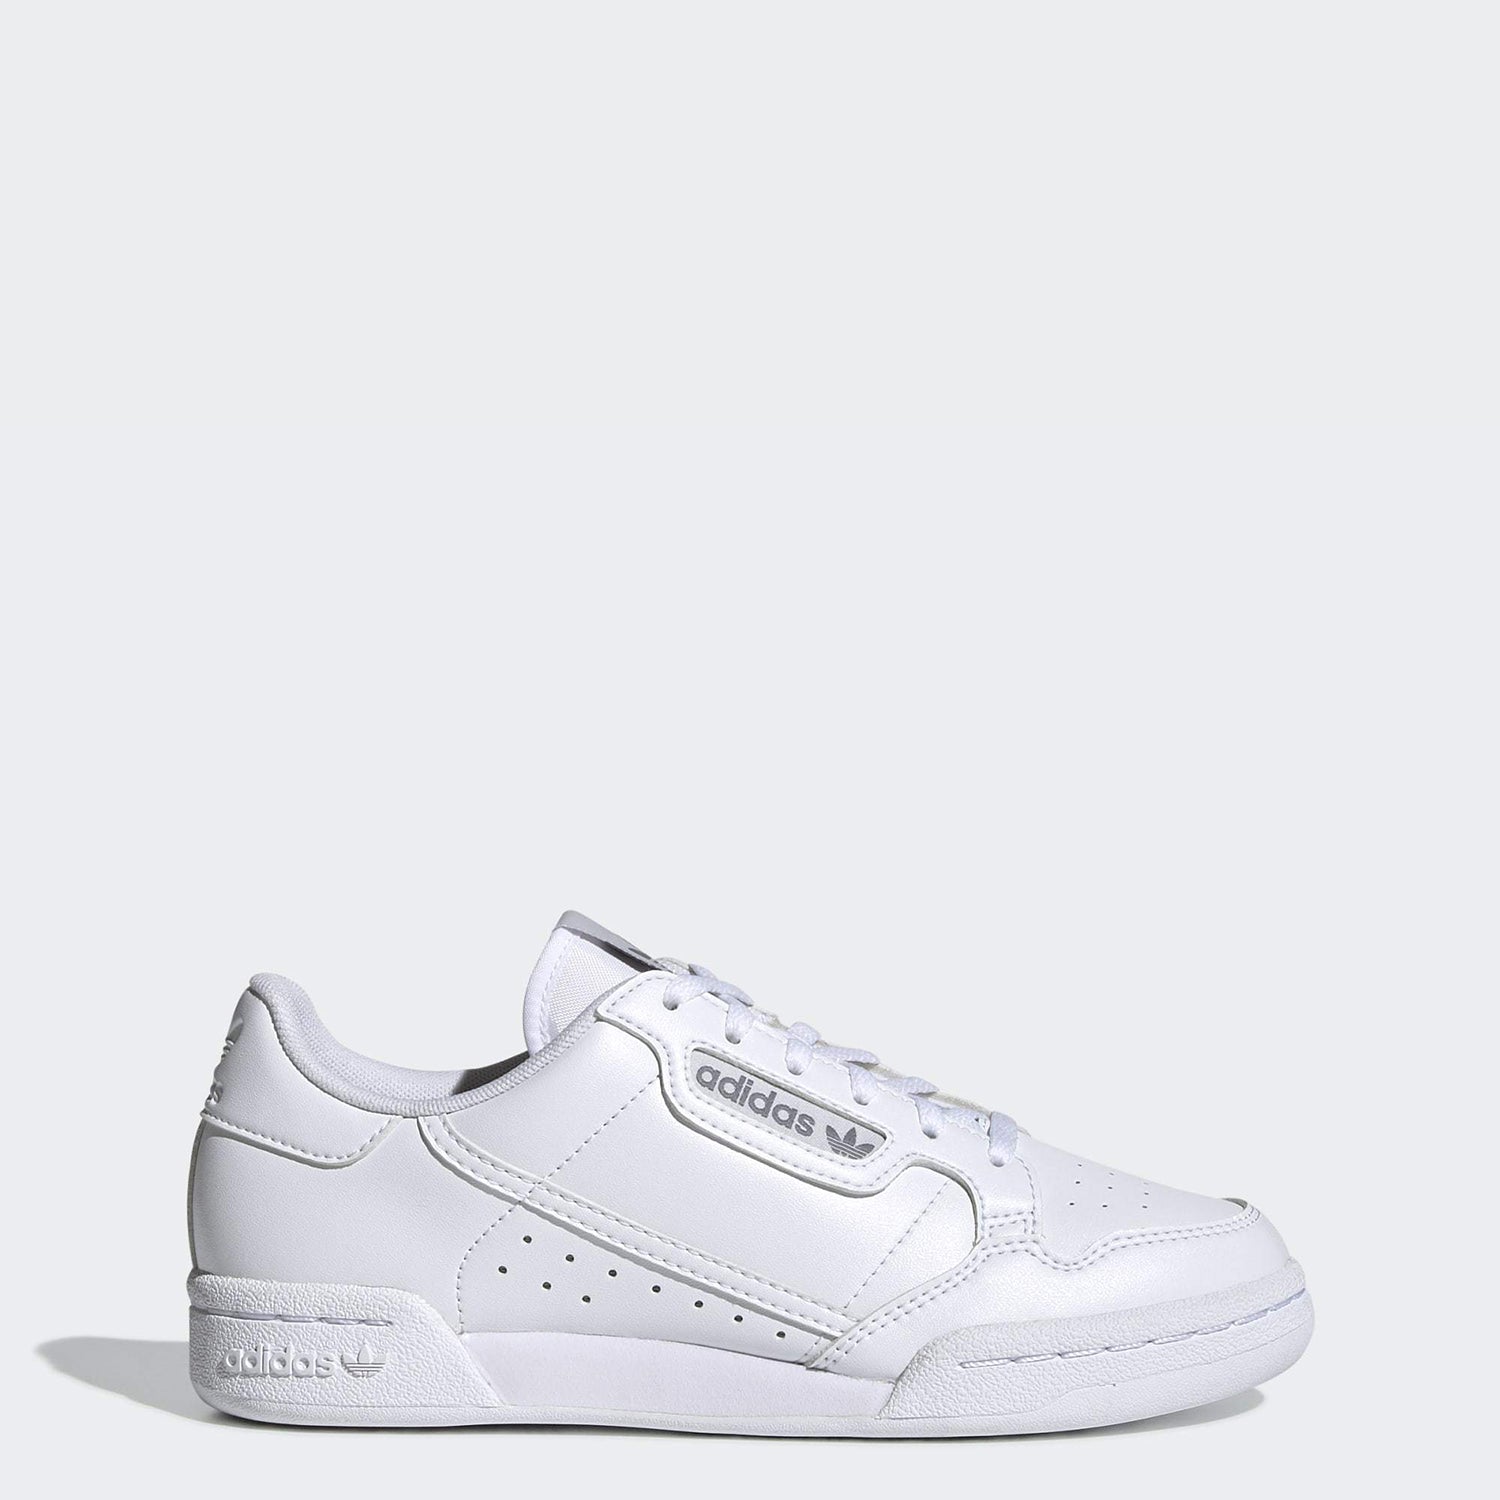 adidas originals continental 8s sneakers in triple white